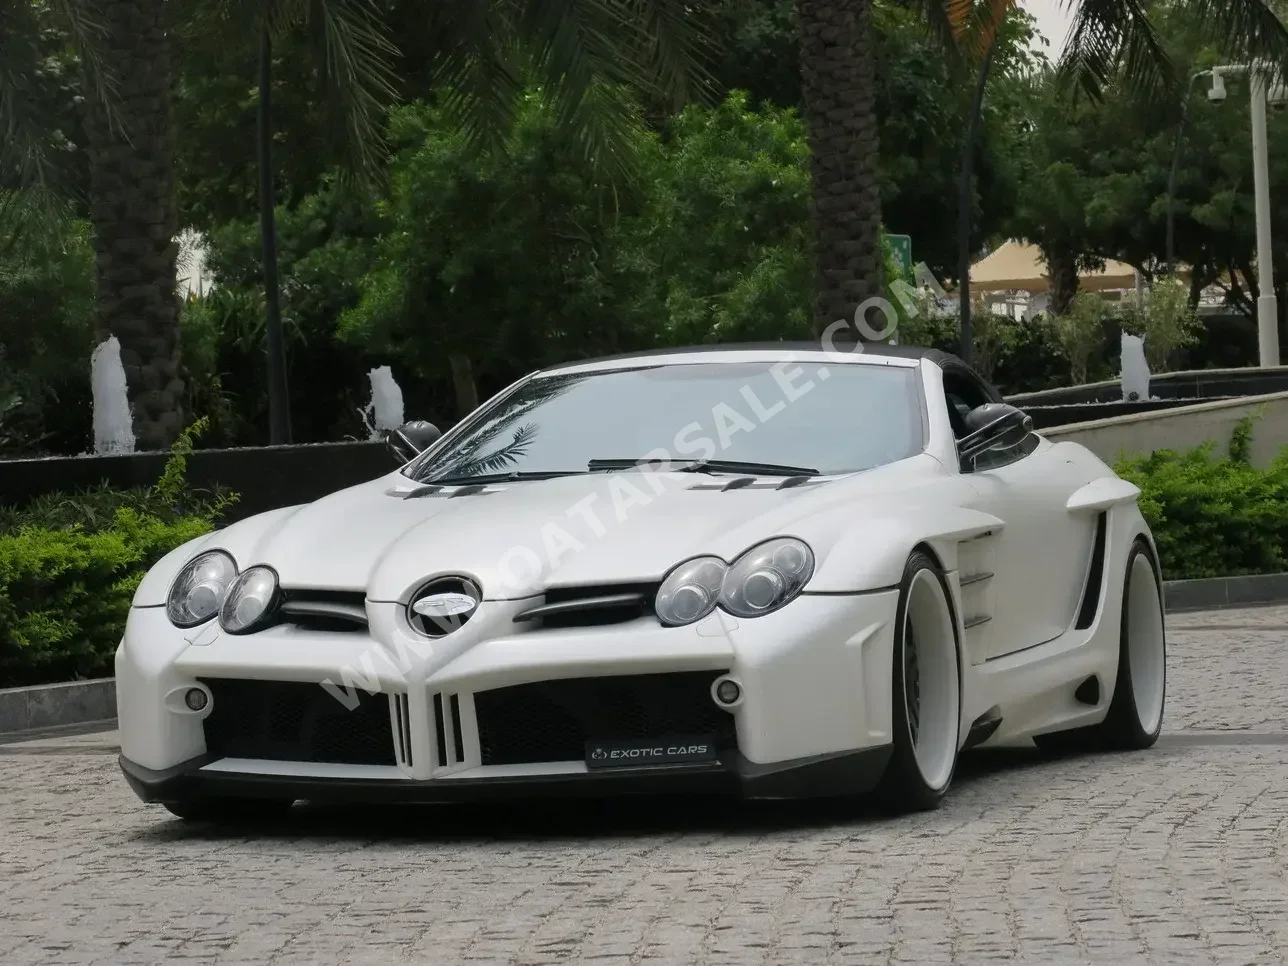 Mercedes-Benz  SLR  Fab Design  2009  Automatic  13,000 Km  8 Cylinder  Rear Wheel Drive (RWD)  Coupe / Sport  White